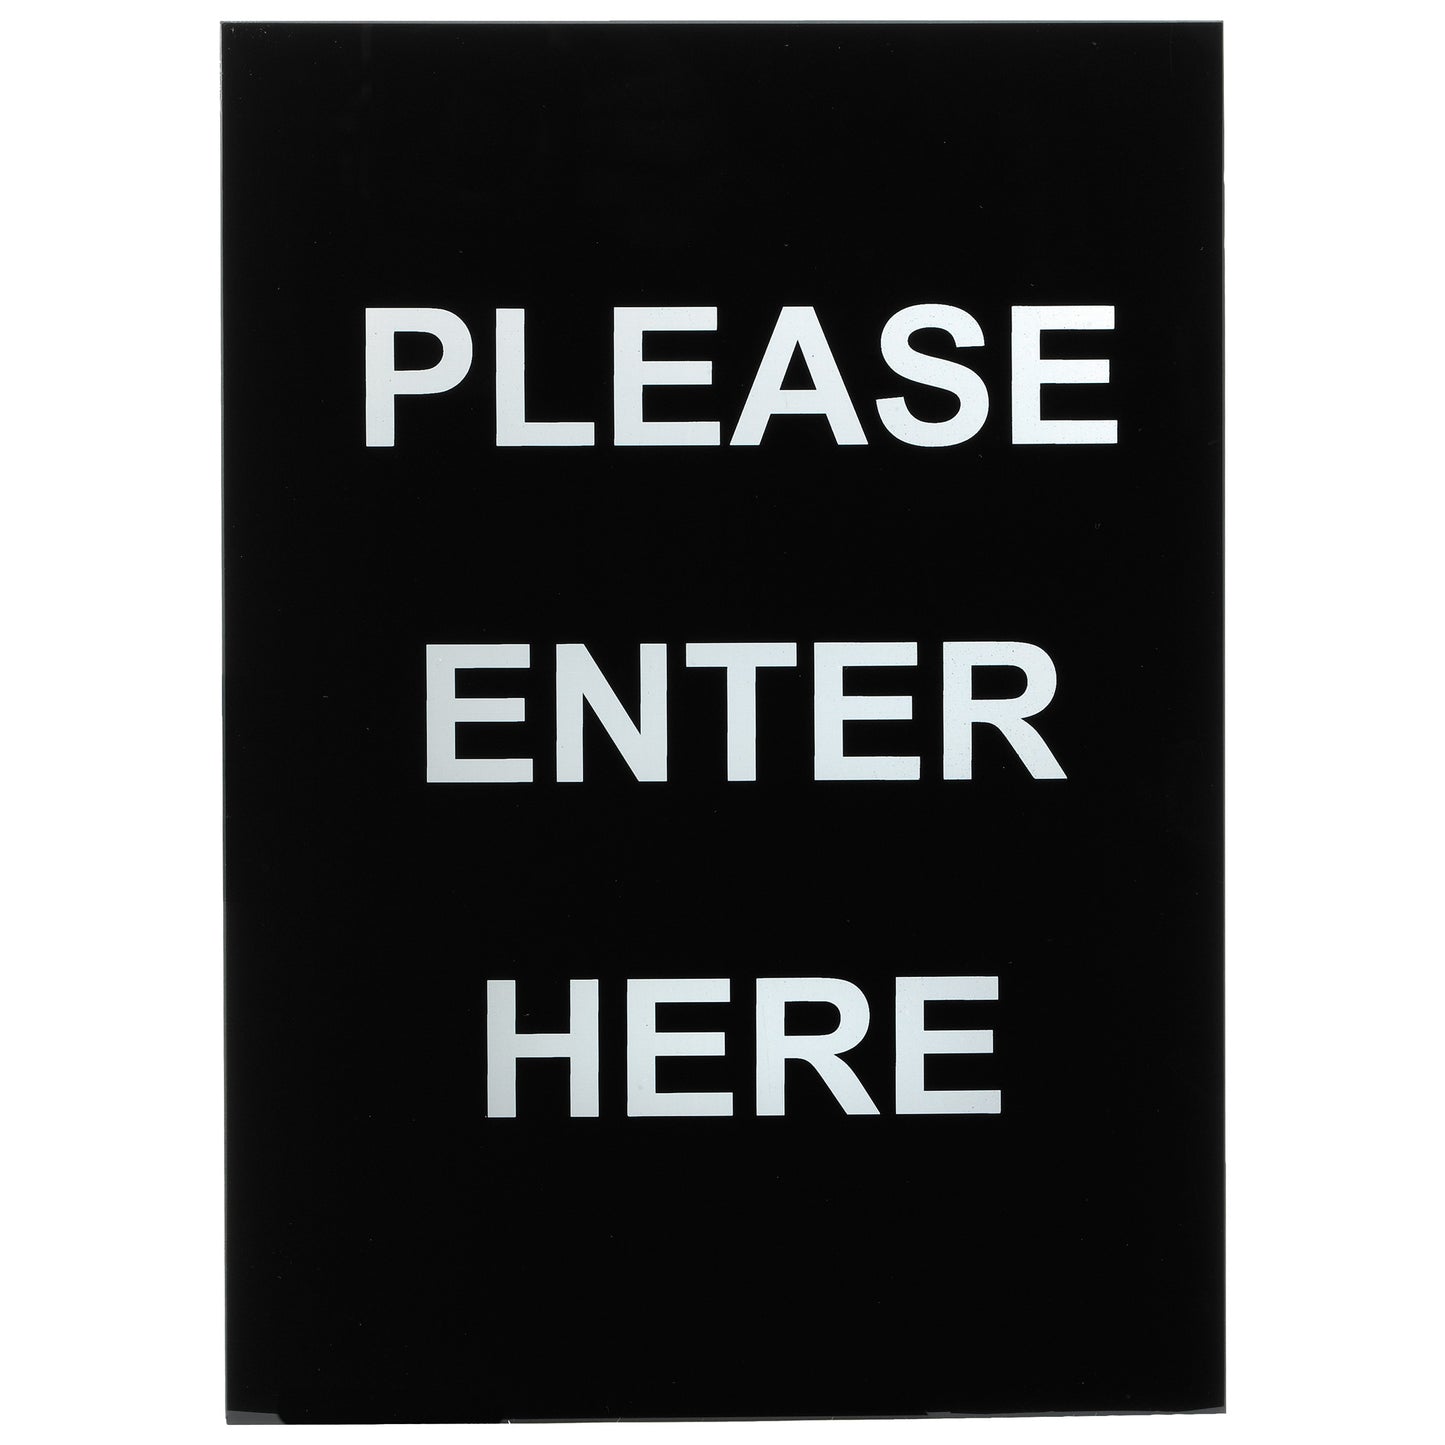 SGN-801 - Stanchion Frame Sign - SGN-801 - Please Enter Here